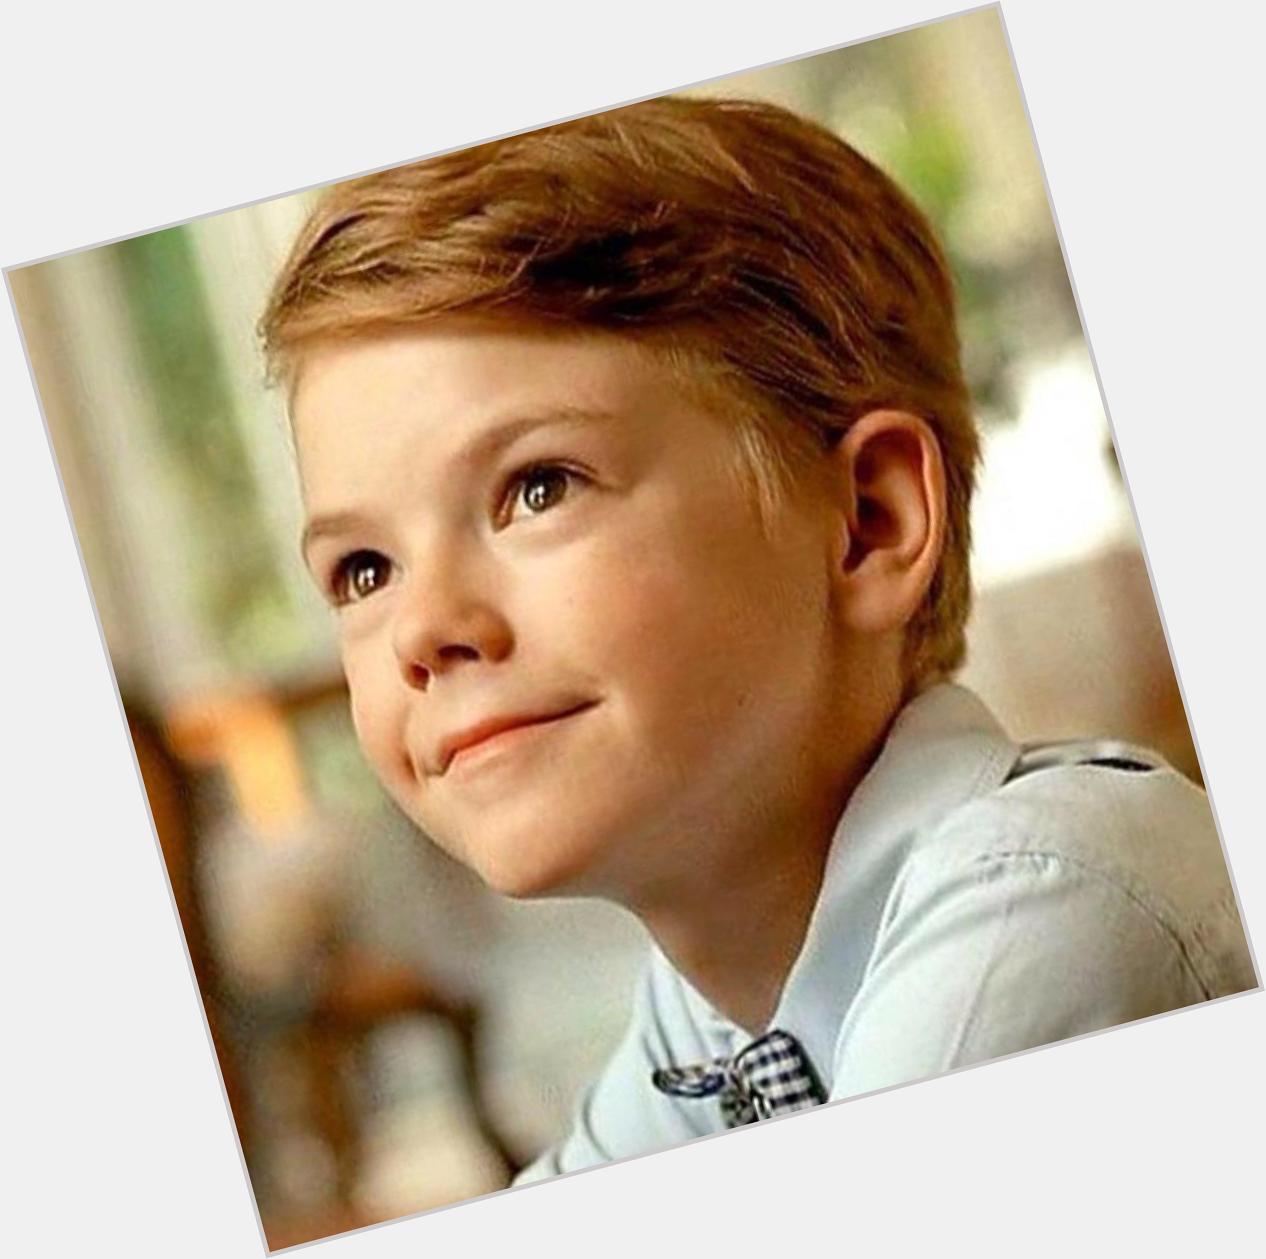 Can\t believe this cutie is already 25  happy birthday Thomas Brodie Sangster <3 